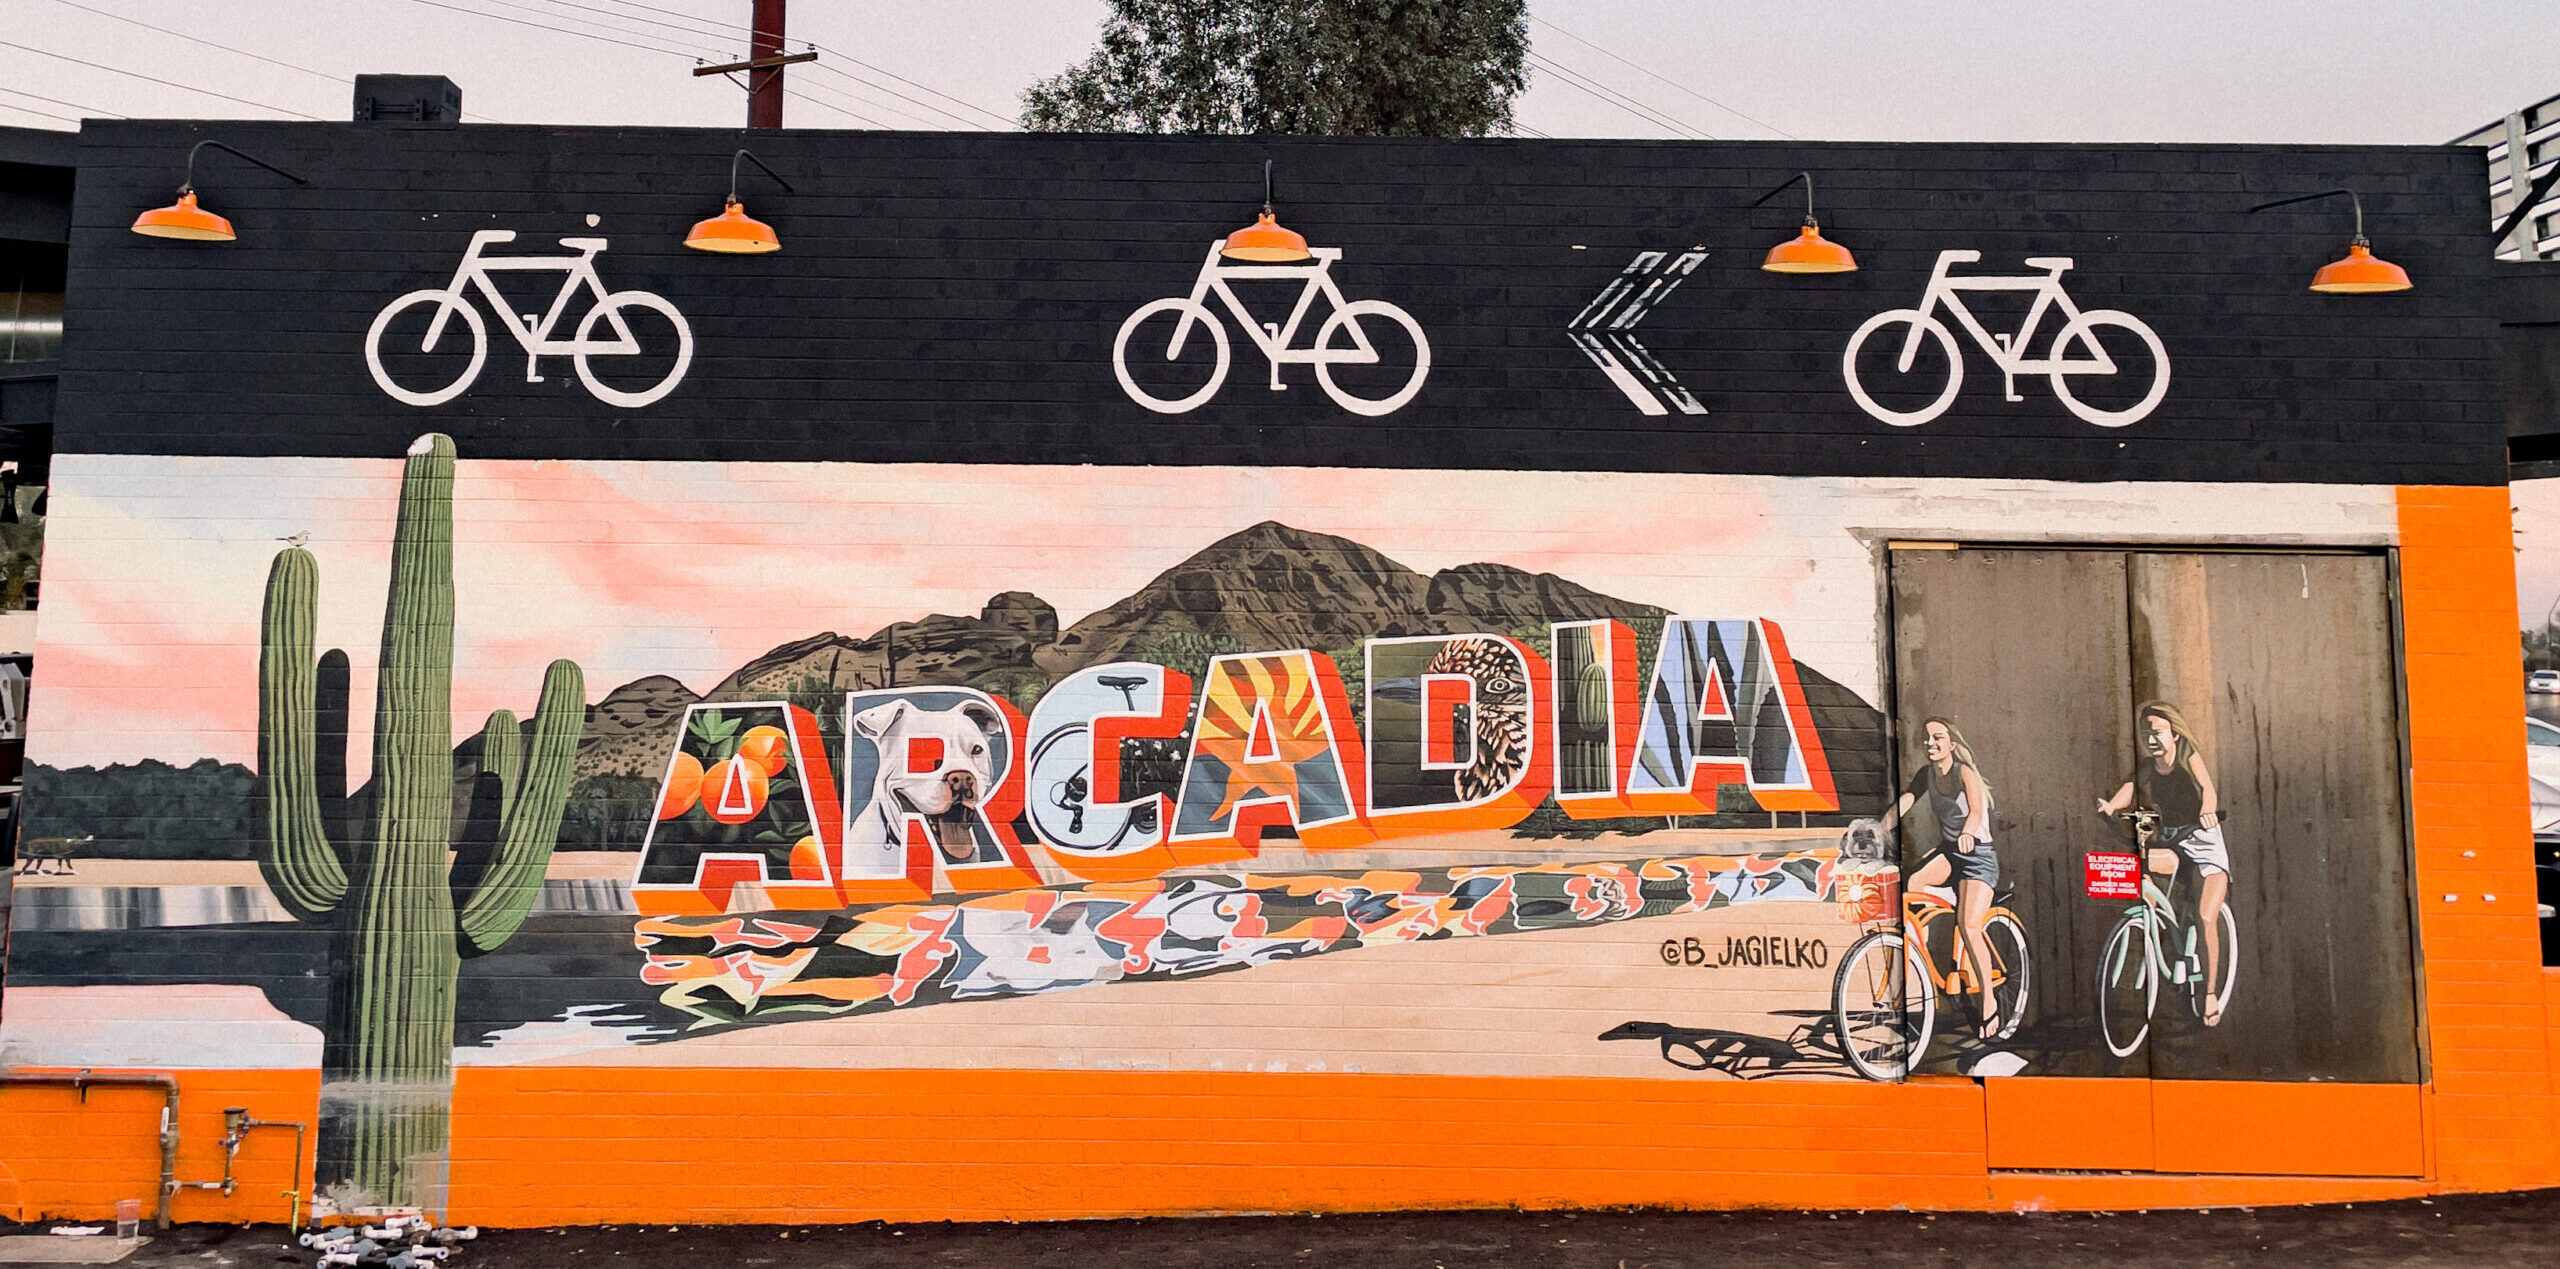 Hand painted mural of bicyclists and a desert landscape. The word Arcadia is in the center of the mural with Arizona inspired images in the center of each letter.